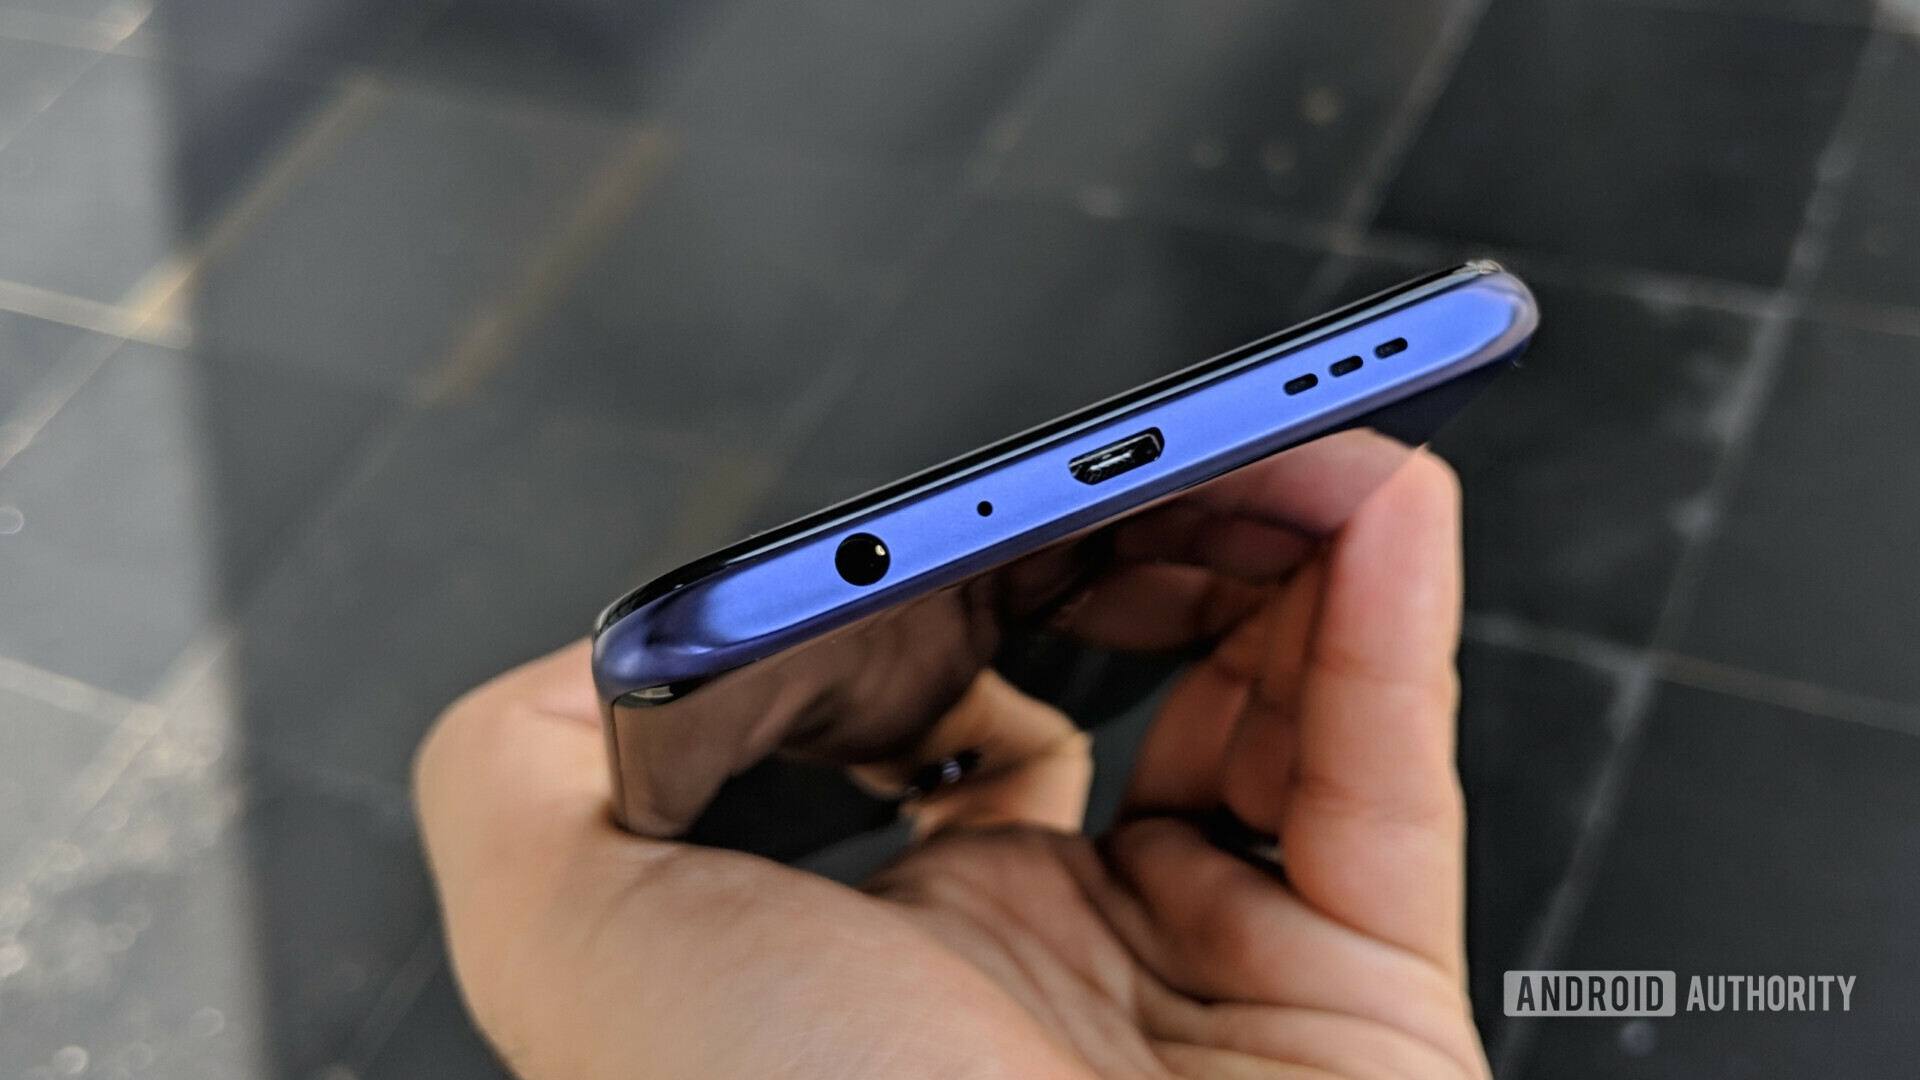 Bottom side of the oppo f11 pro showing the micro USB and headphone jack